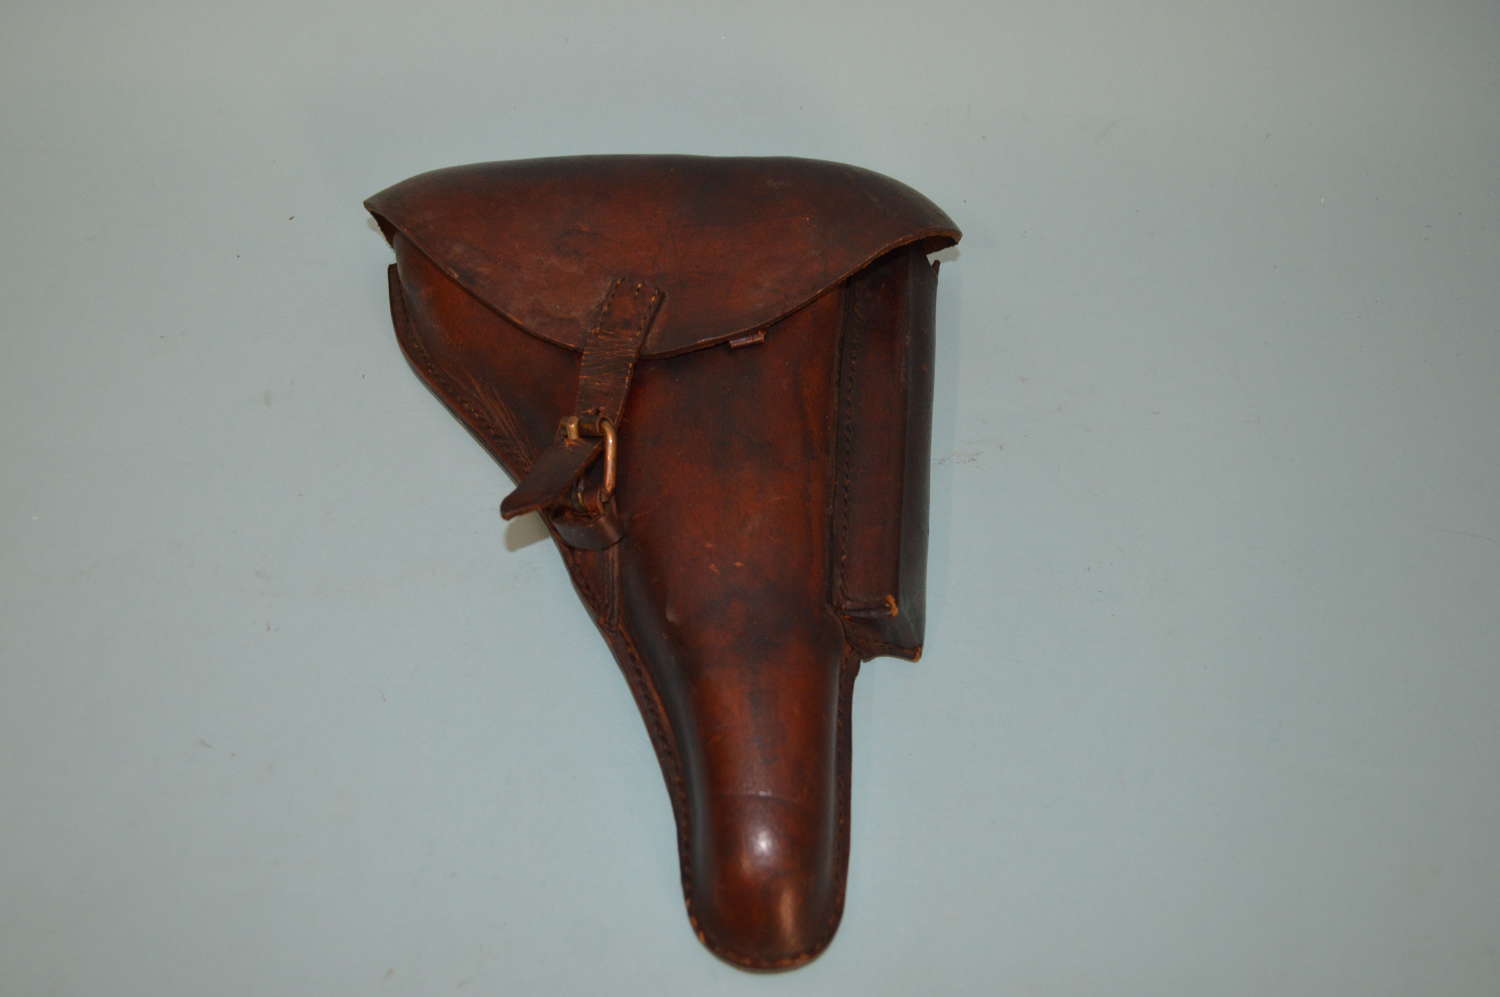 WW2 TYPE GERMAN LUGER HOLSTER.